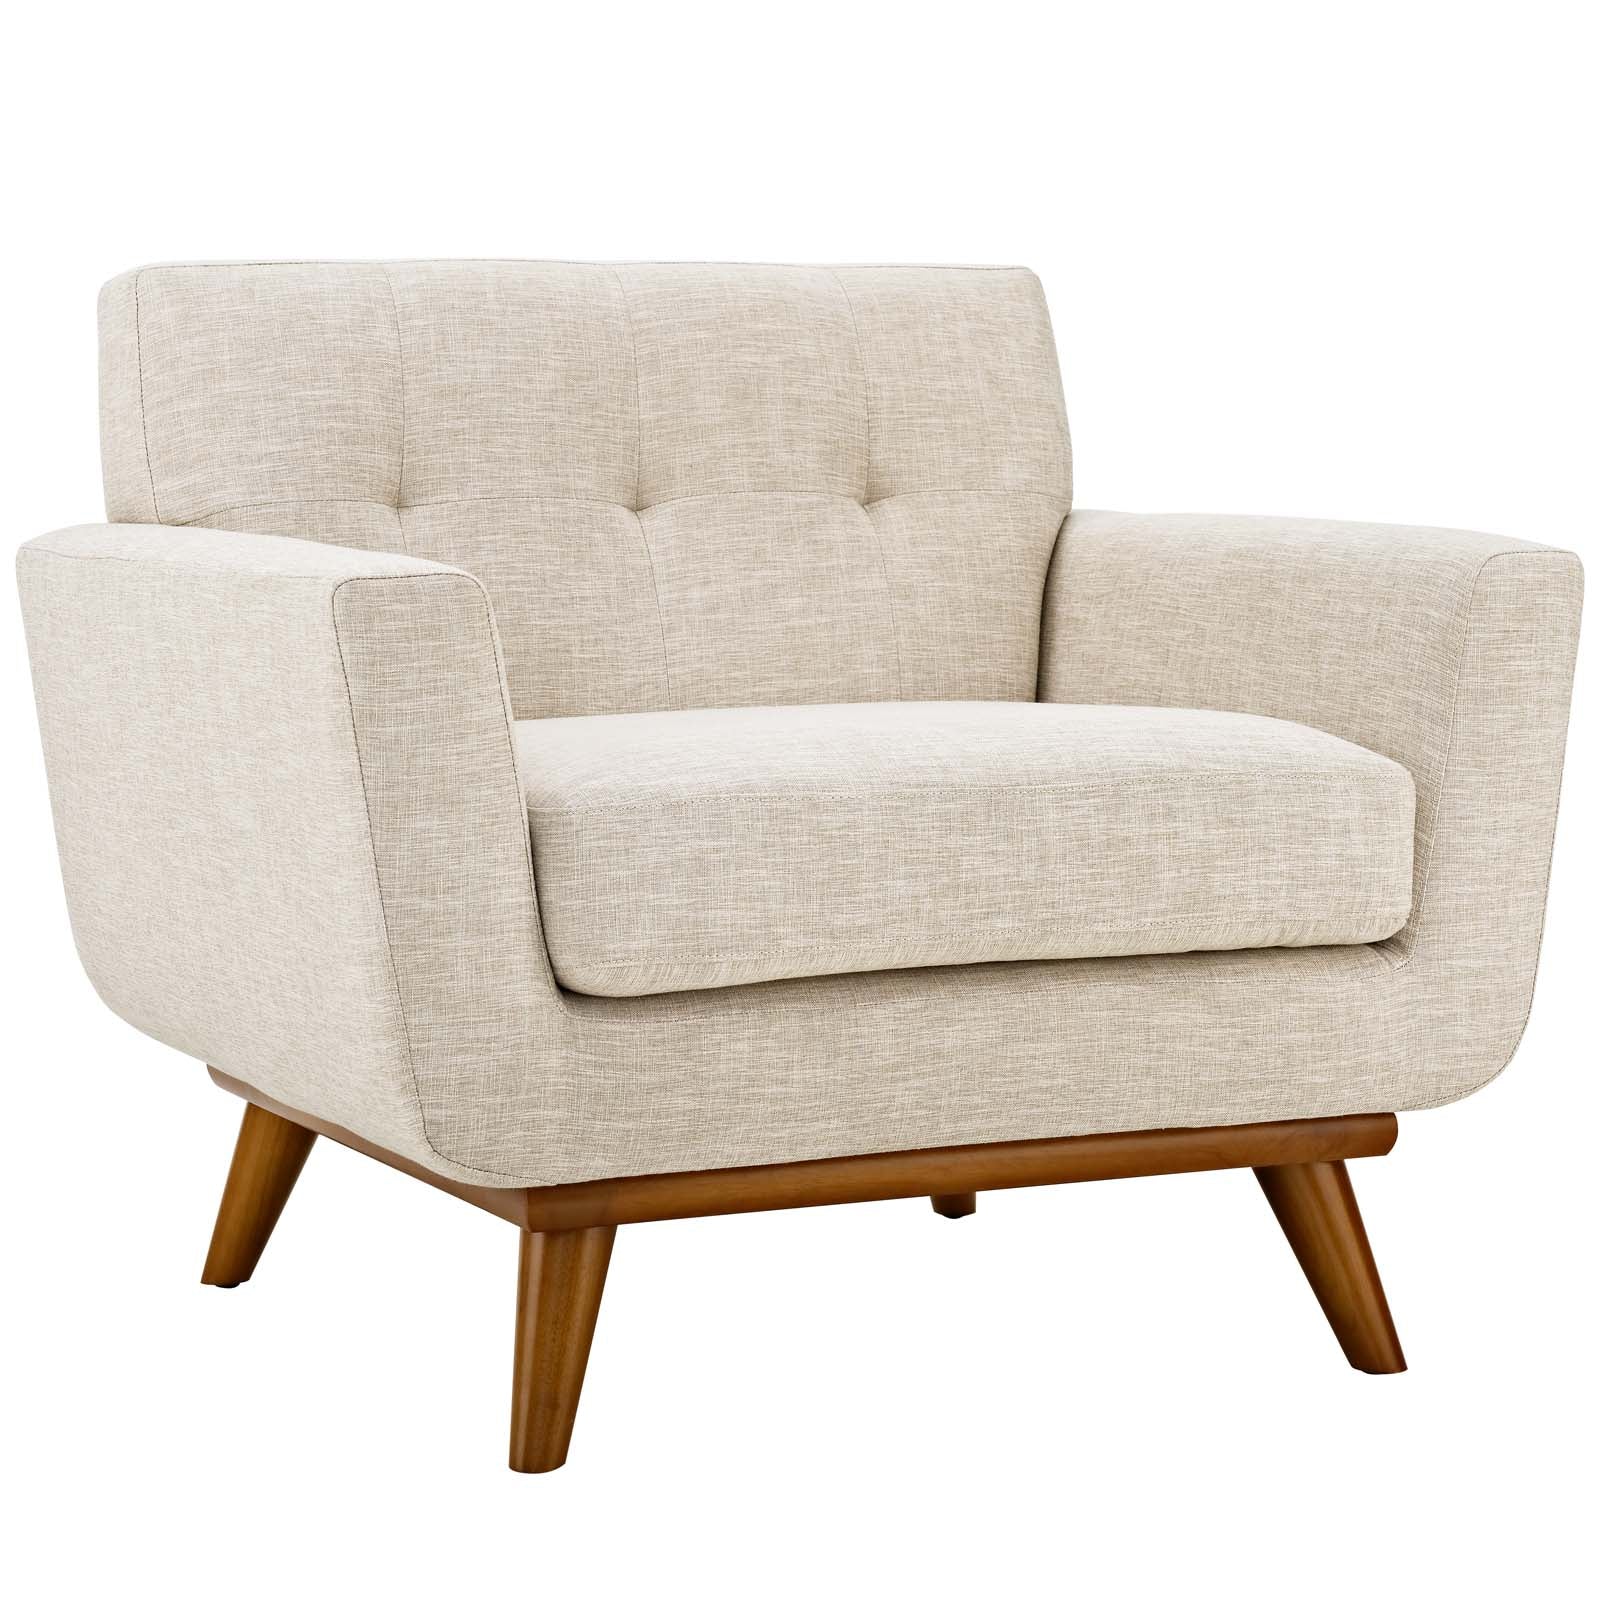 Modway Living Room Sets - Engage Sofa Loveseat and Armchair Beige ( Set of 3 )